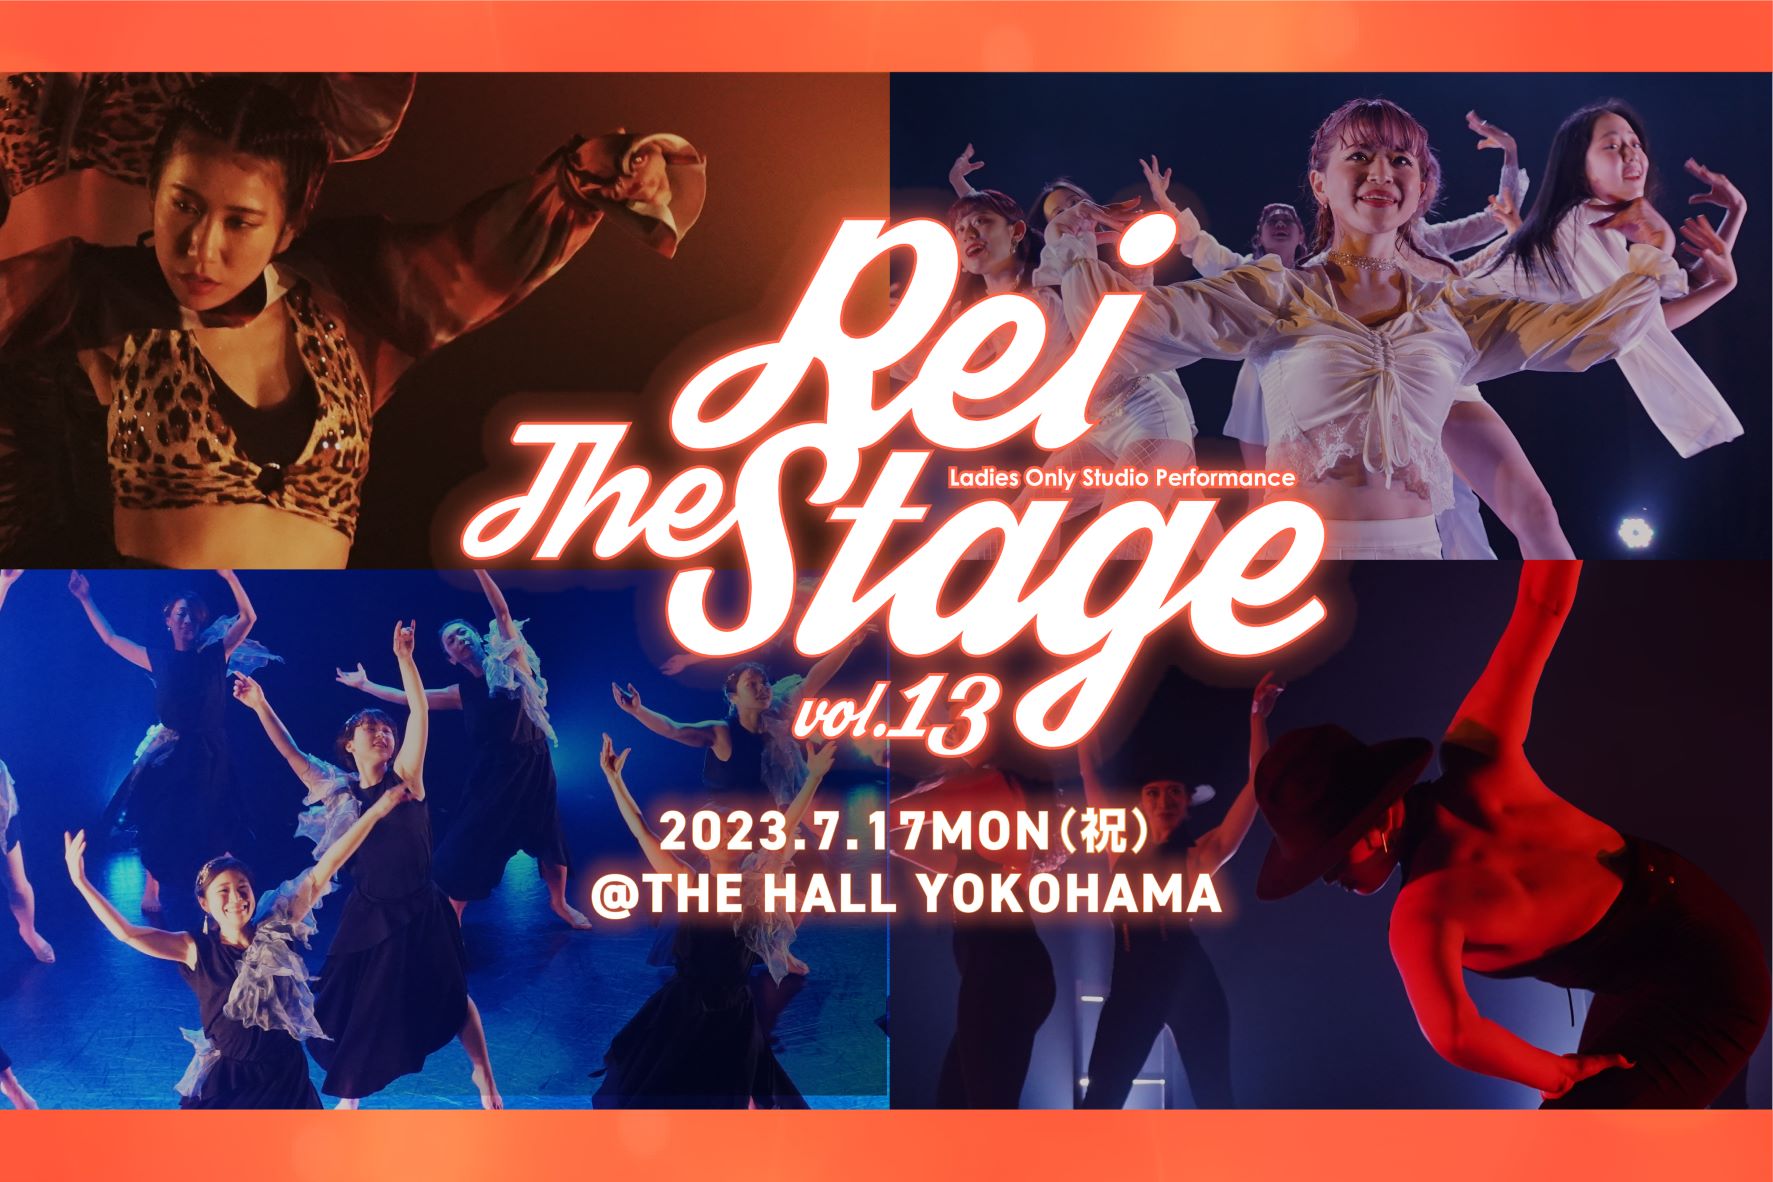 Rei The Stage vol.13